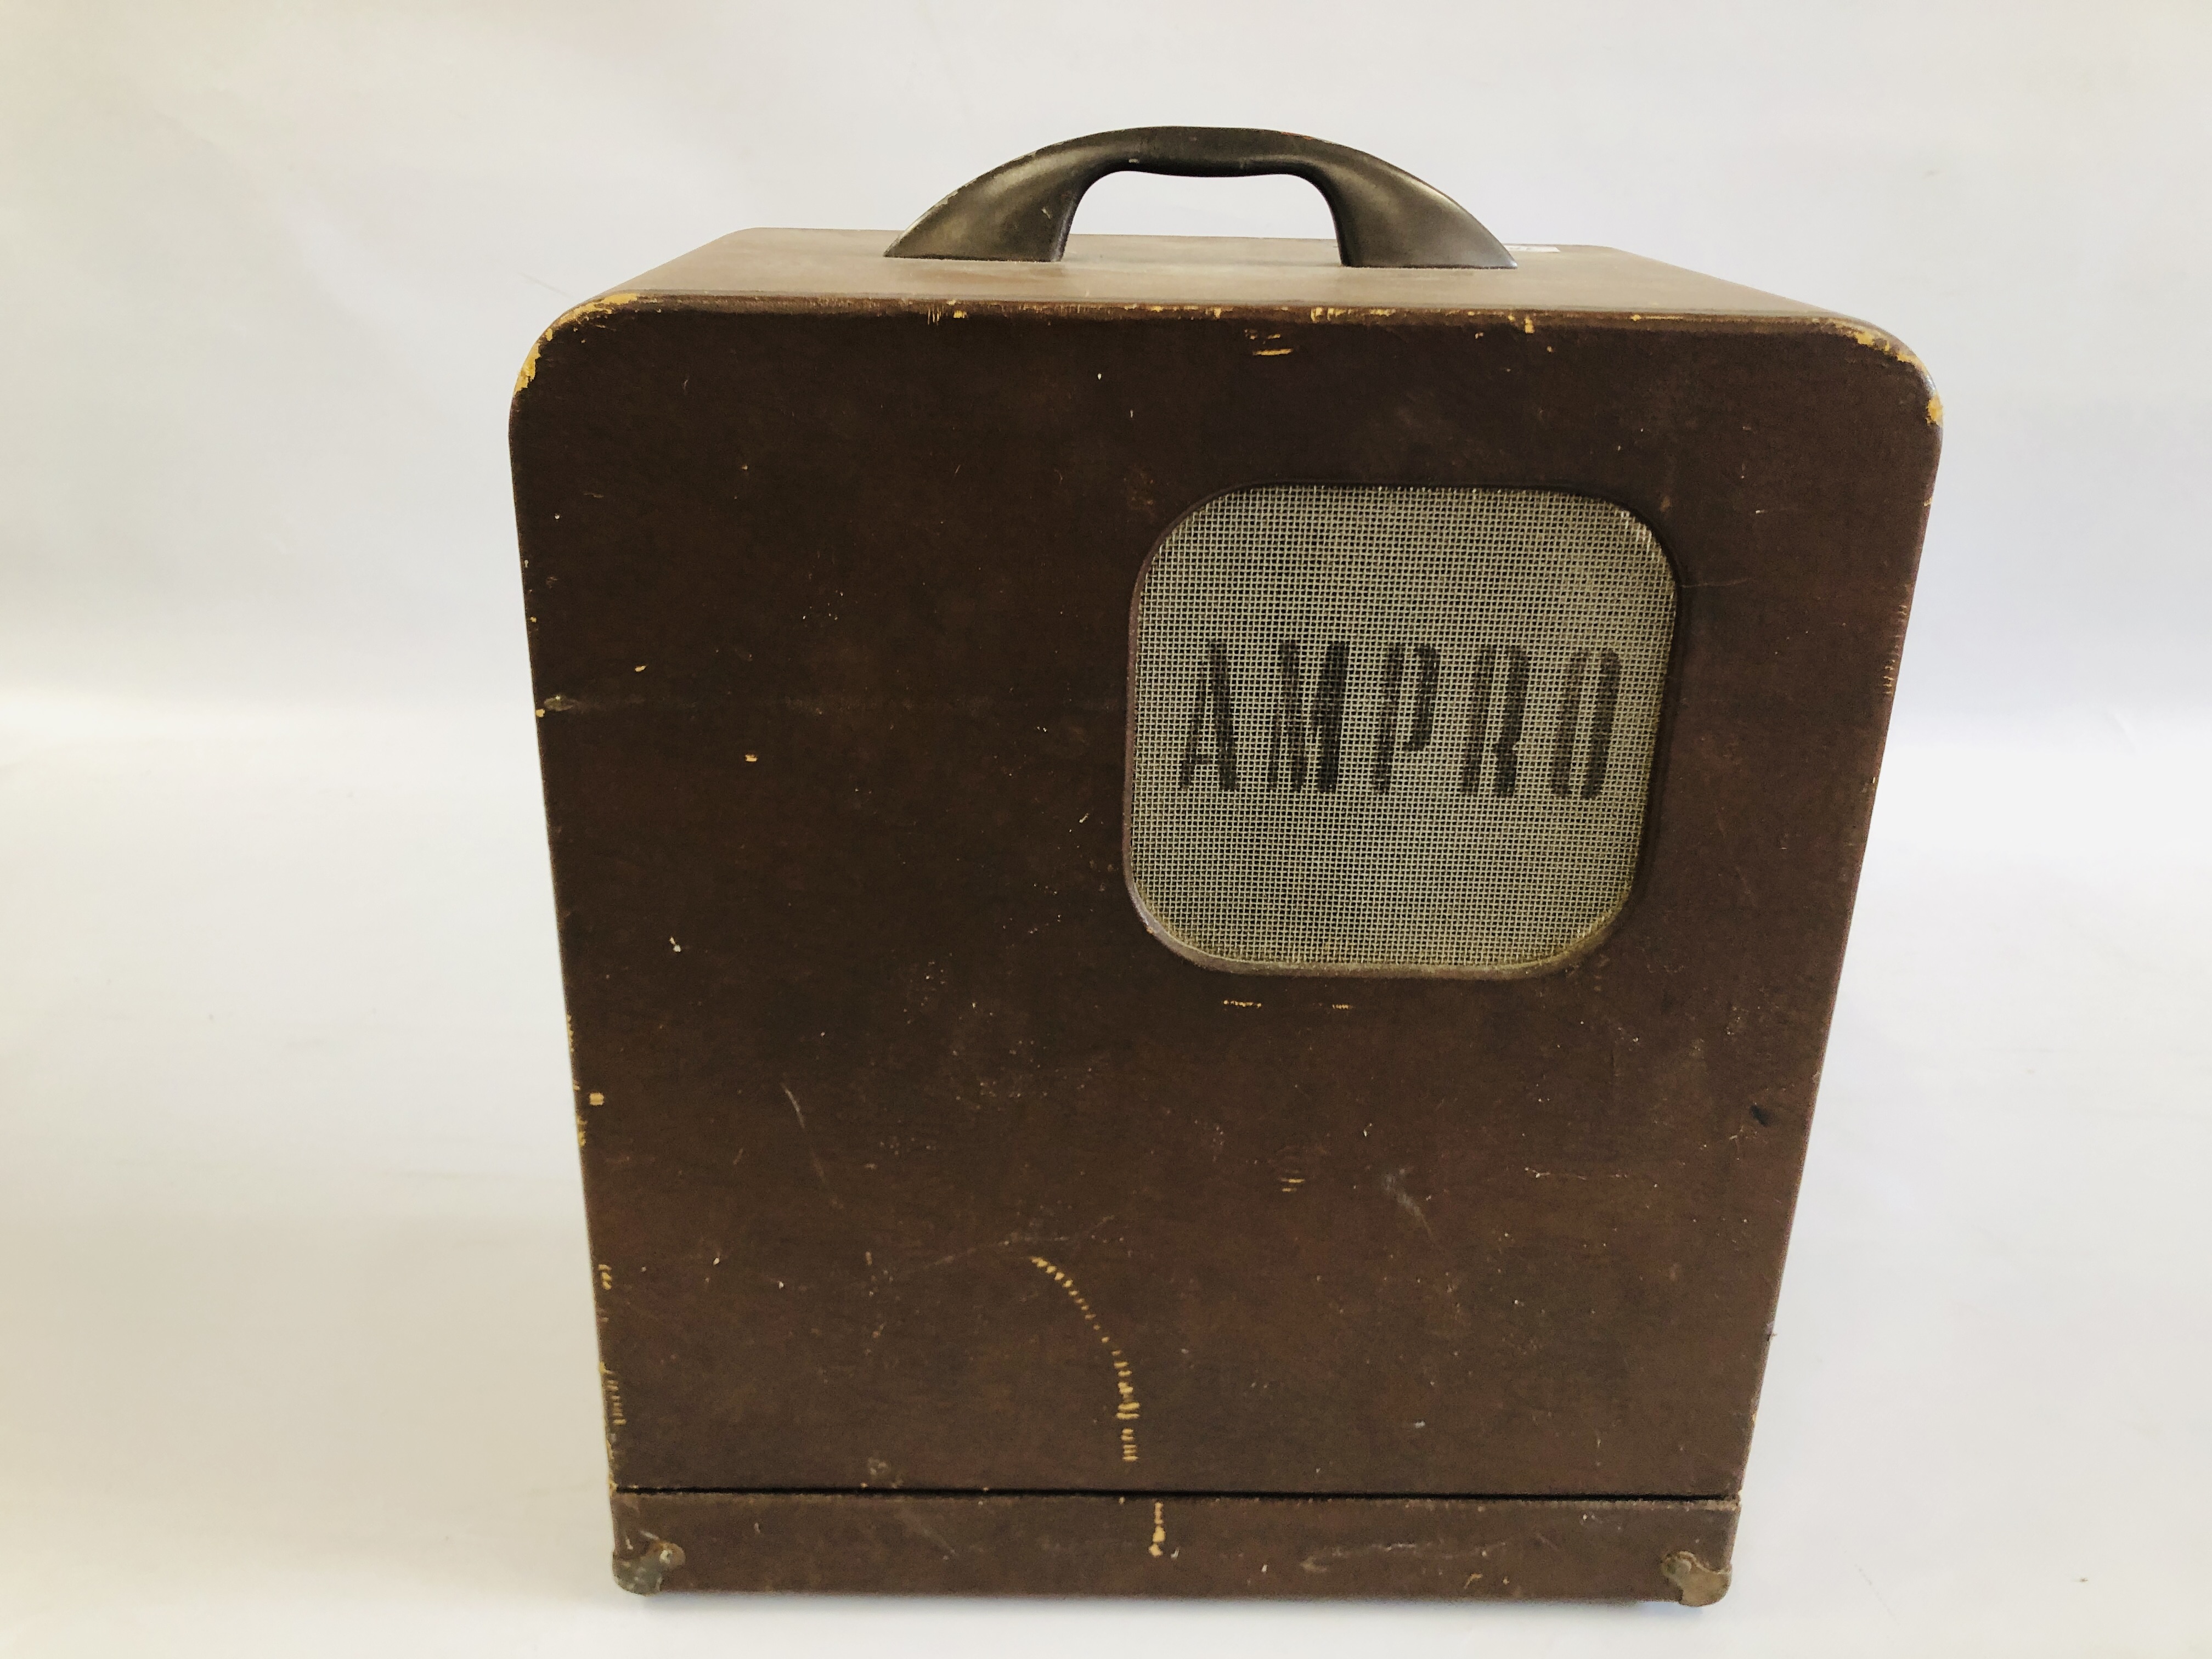 A CASED AMPRO STYLIST PROJECTOR - COLLECTORS ITEM ONLY - SOLD AS SEEN. - Image 6 of 6